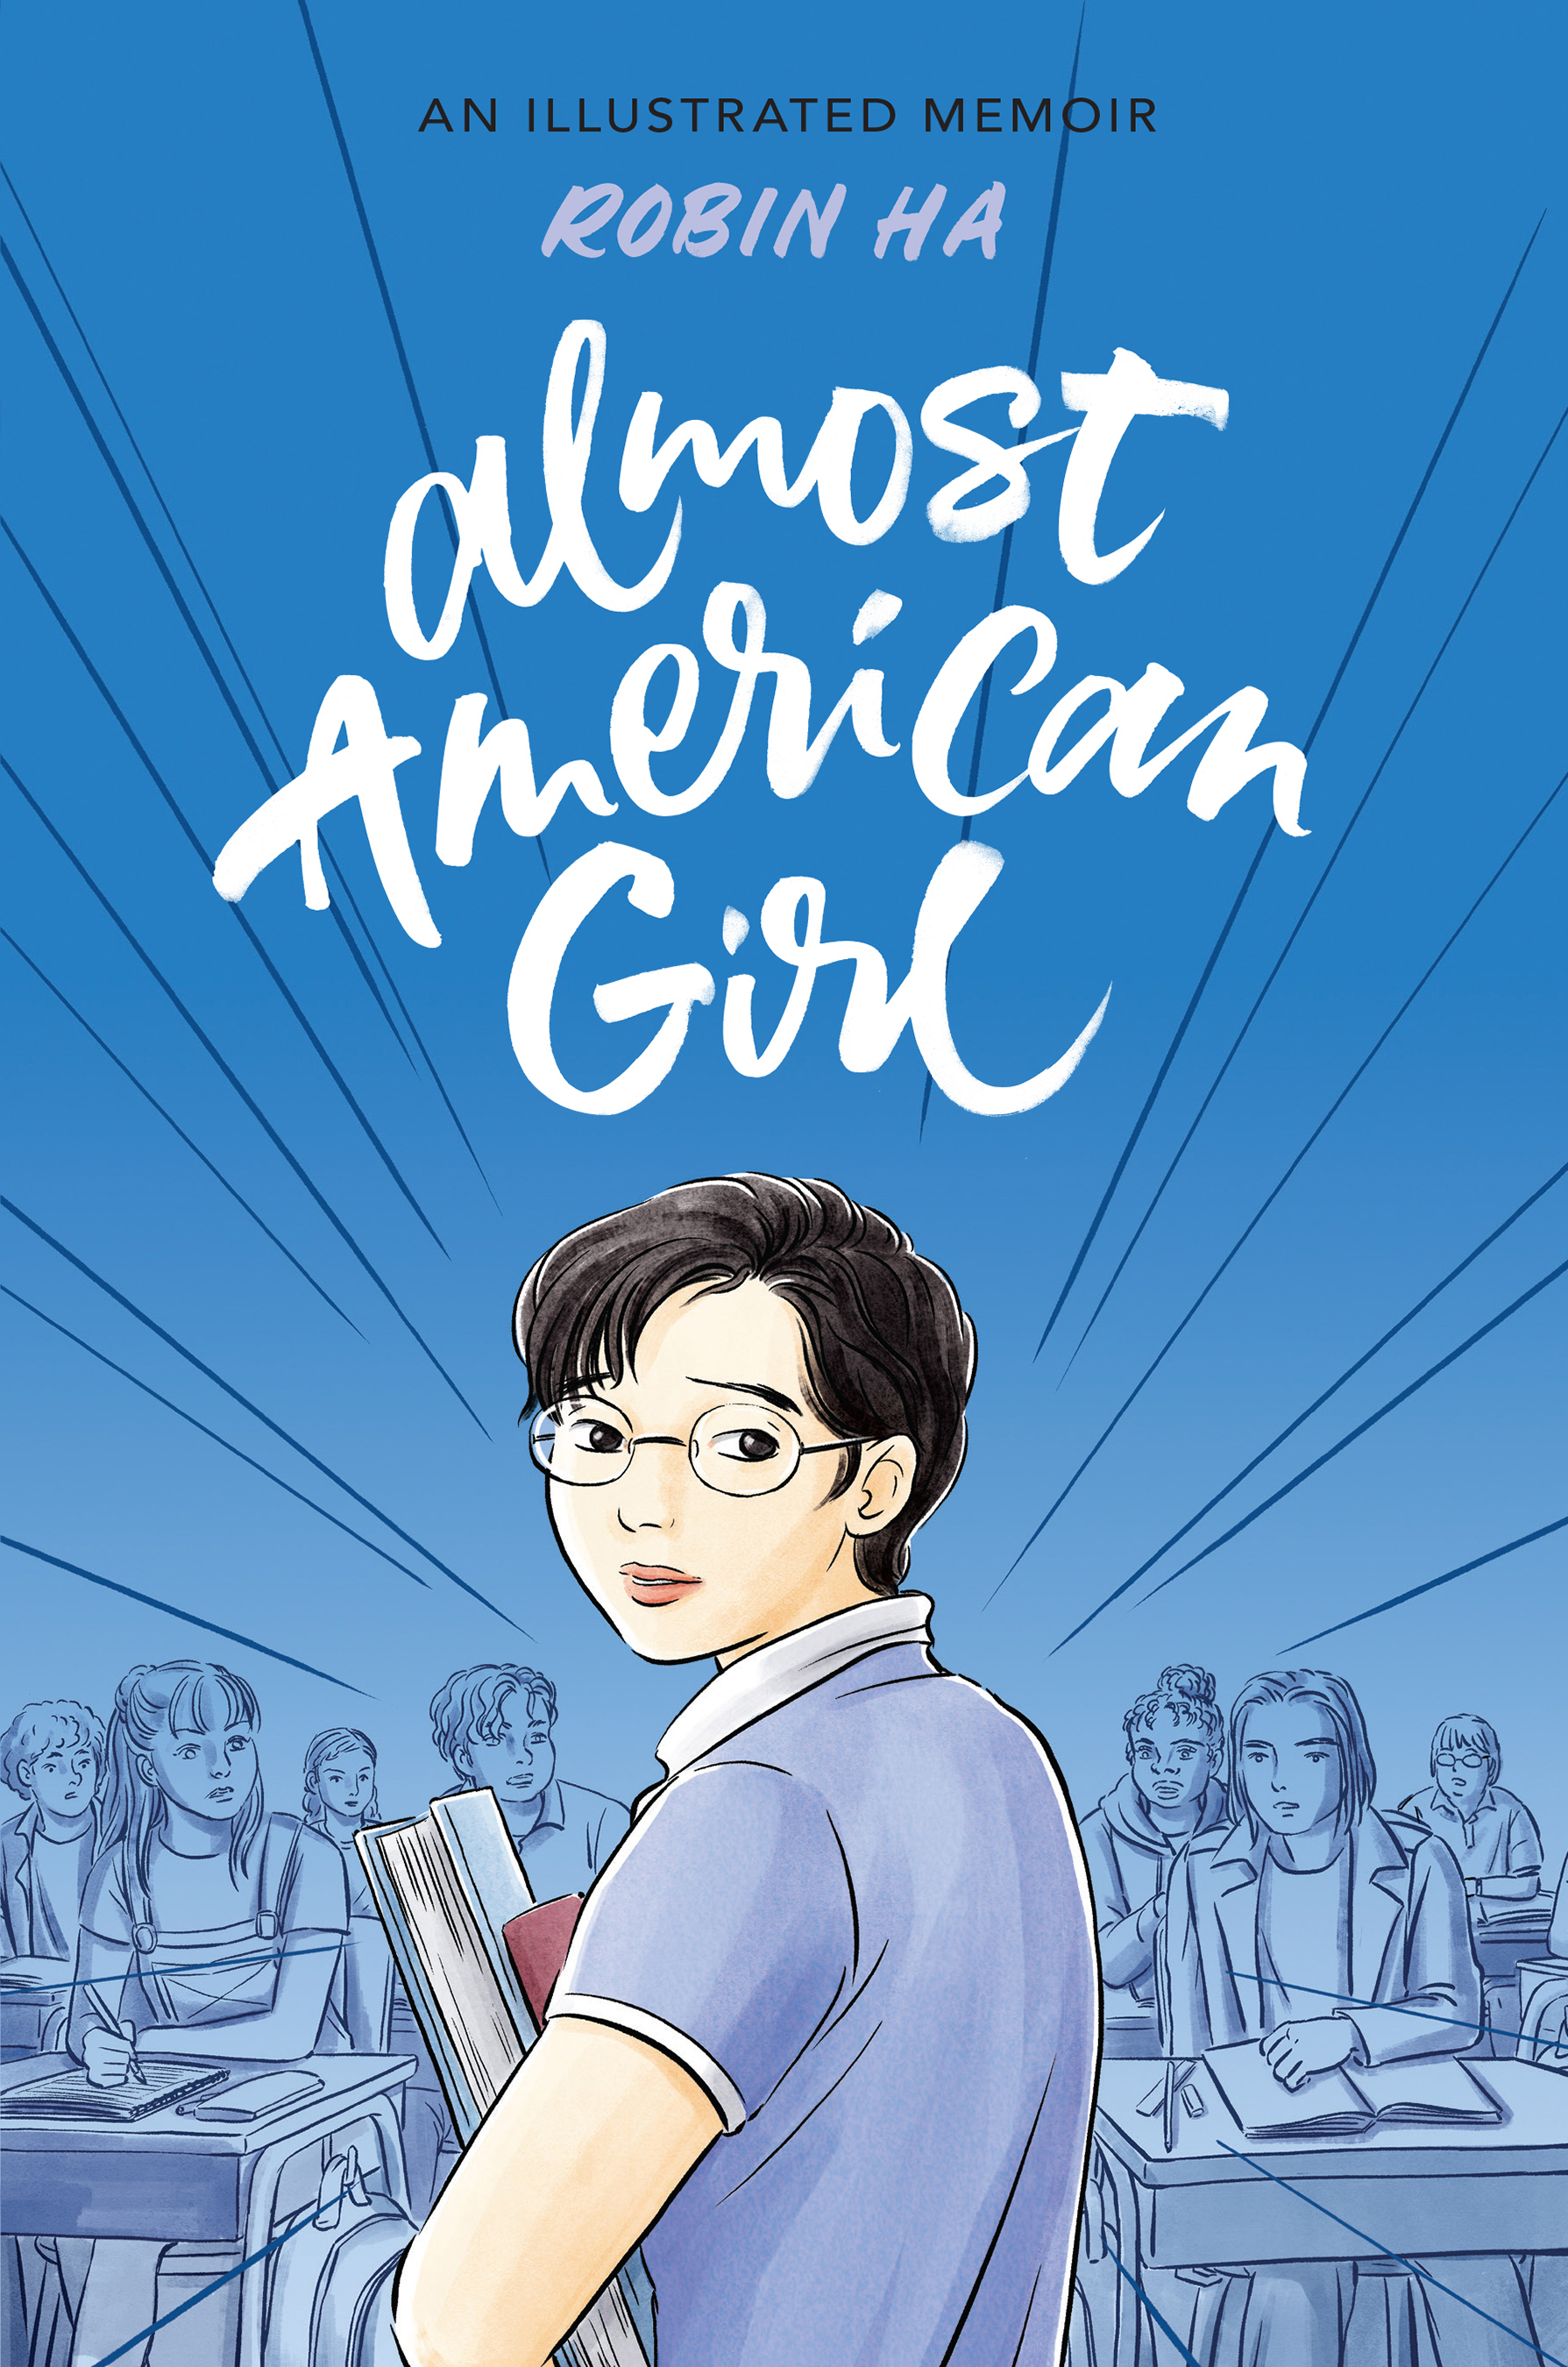 A vibrant blue book cover of “Almost American Girl” an illustrated memoir by Robin Ha. Below the book title is a graphic illustration of light-skinned teenager with short dark hair and glasses. The girl is carrying school books in her arms and looks over her shoulder at the viewer. Behind her is a classroom full of students sitting at their desks.